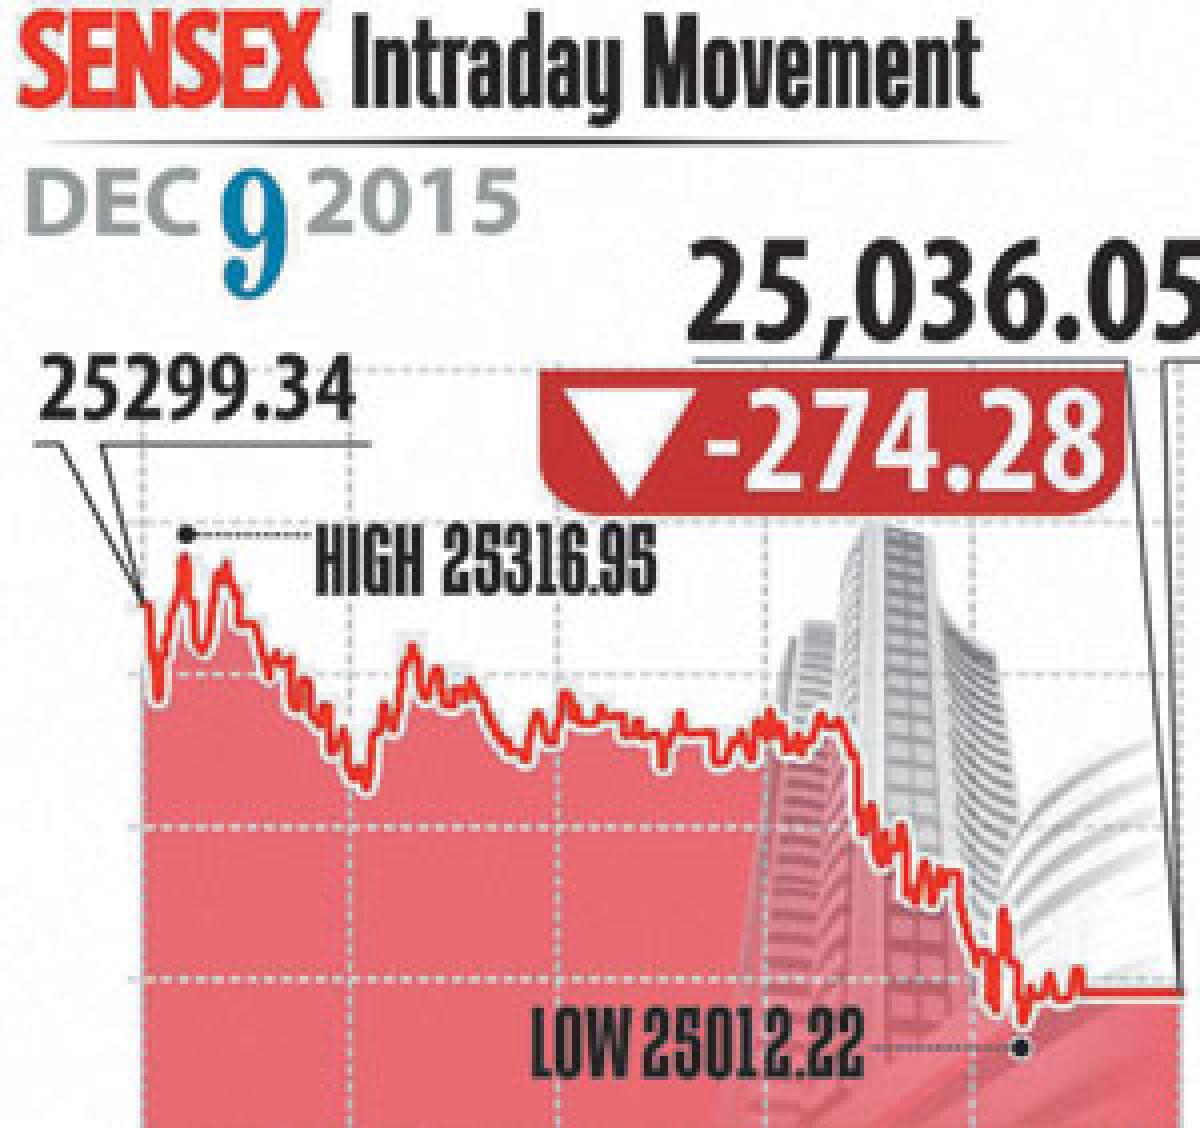 Sensex sinks 274 points on GST  fears; this was the 6th consecutive session of losses, passing of GST will see sharp bounce back - Times of India